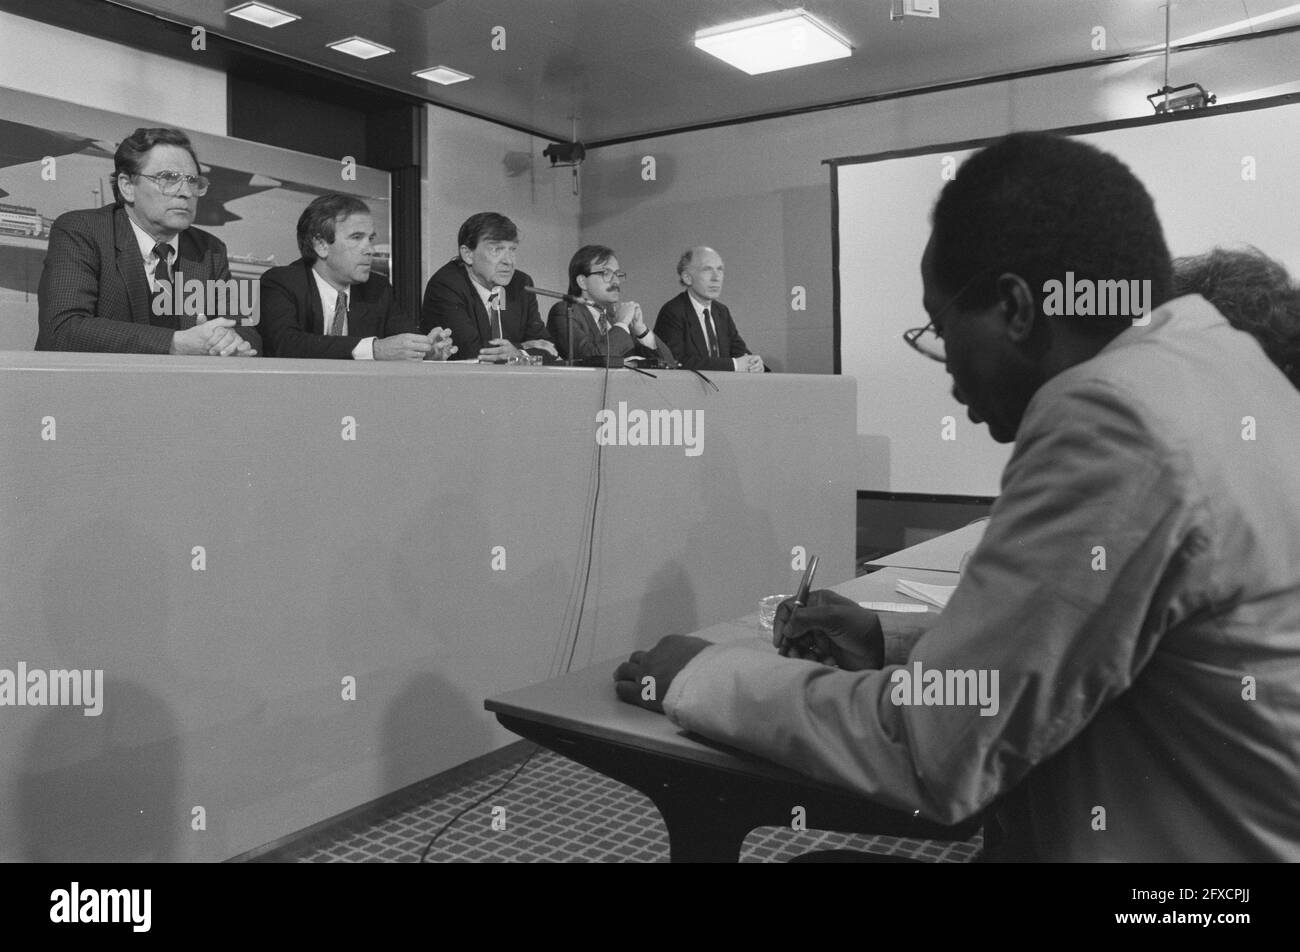 Parliamentary delegation back from Suriname at Schiphol Airport, November 13, 1988, The Netherlands, 20th century press agency photo, news to remember, documentary, historic photography 1945-1990, visual stories, human history of the Twentieth Century, capturing moments in time Stock Photo